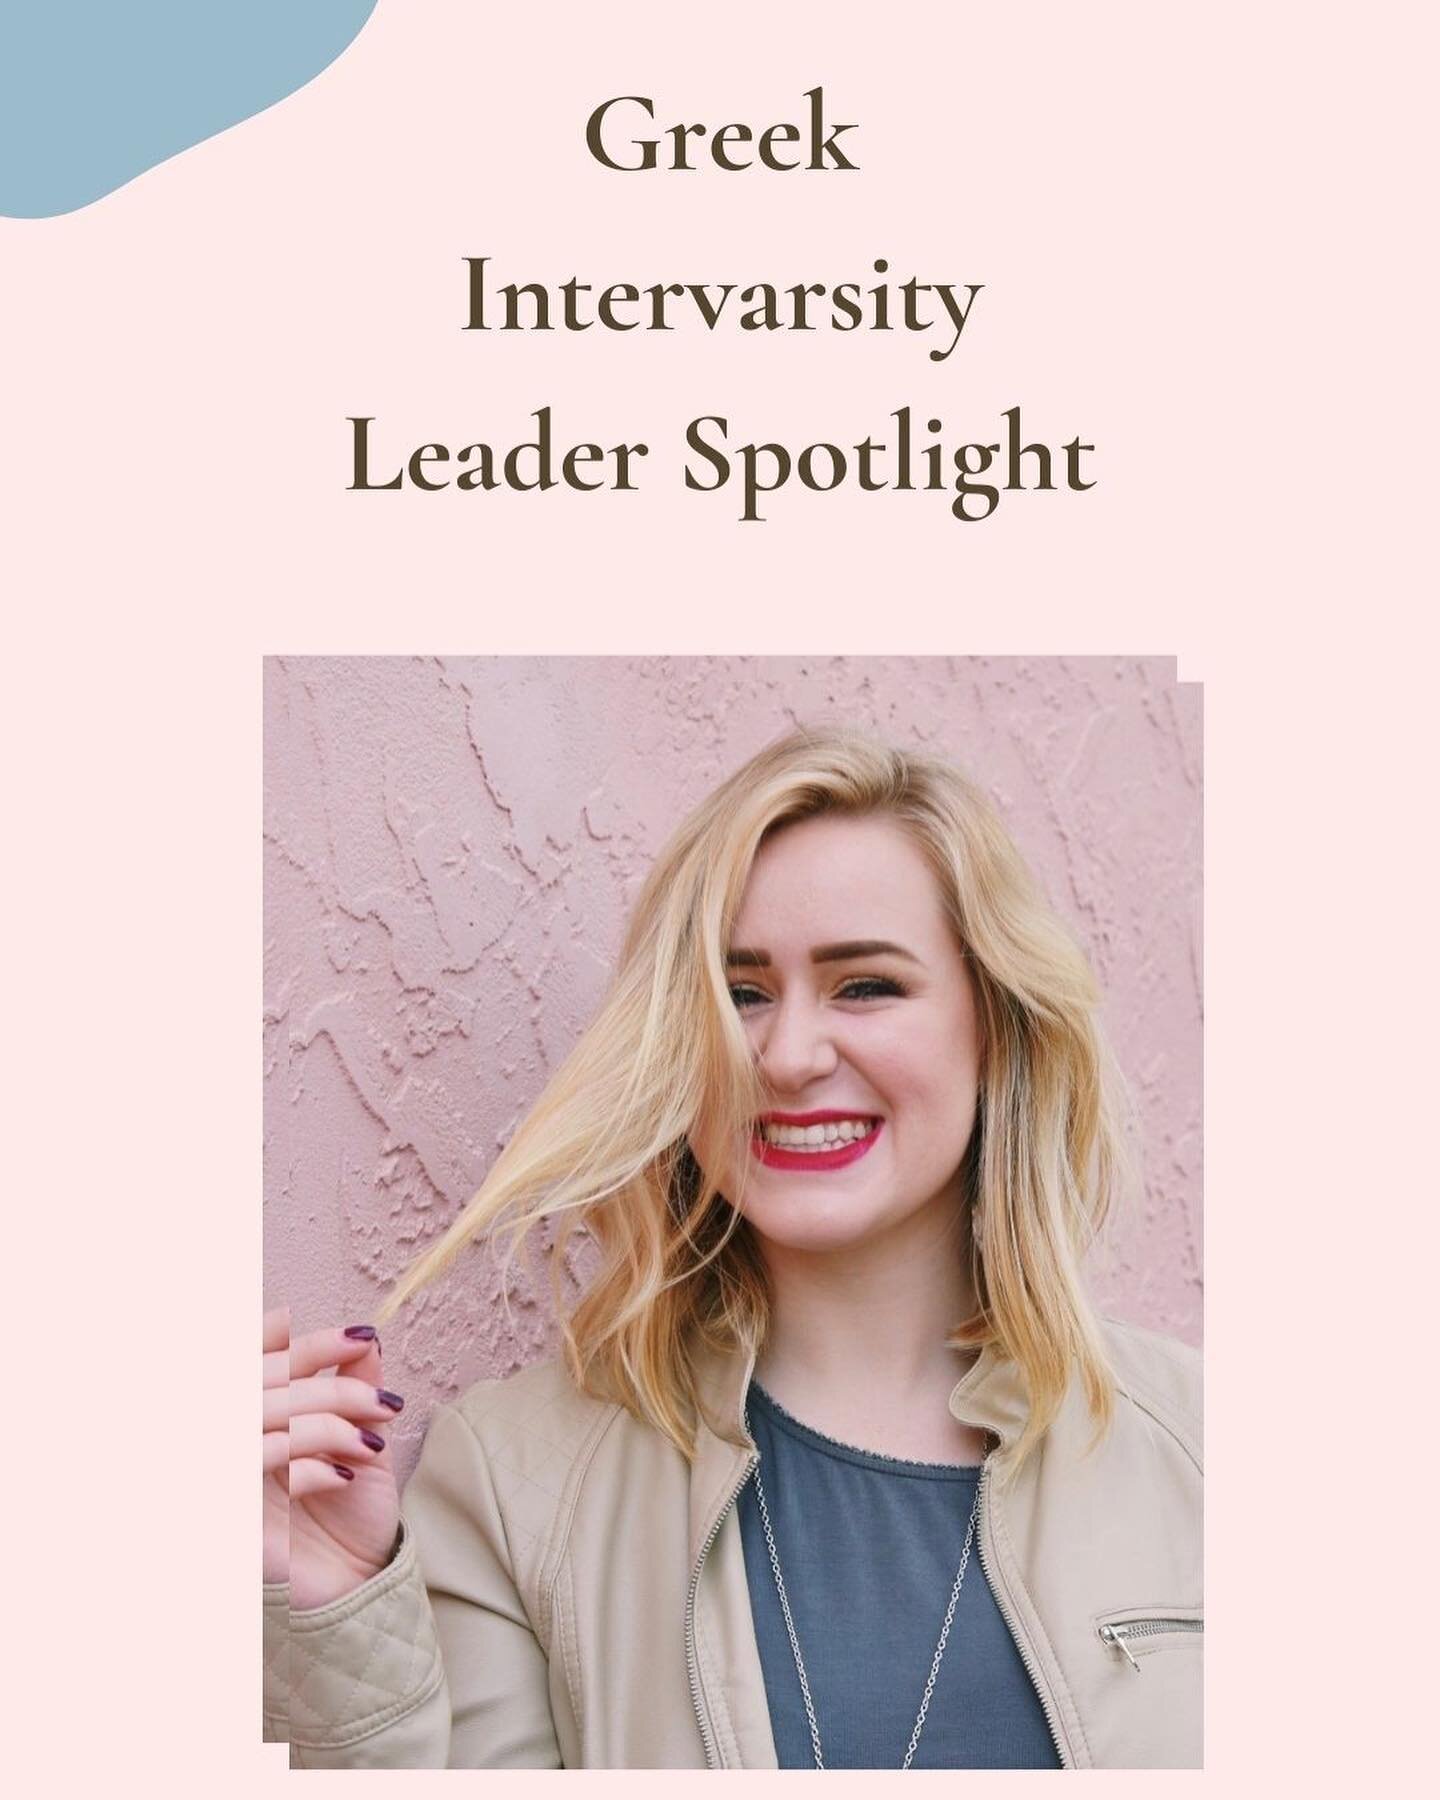 Day two of our leadership spotlights!

Meet Lee Ann! She&rsquo;s a senior and a member of Gamma Sigma Sigma. She has such a great sense of humor and is an enneagram 3w2! She currently serves as our President and we are so proud of how hard she works 